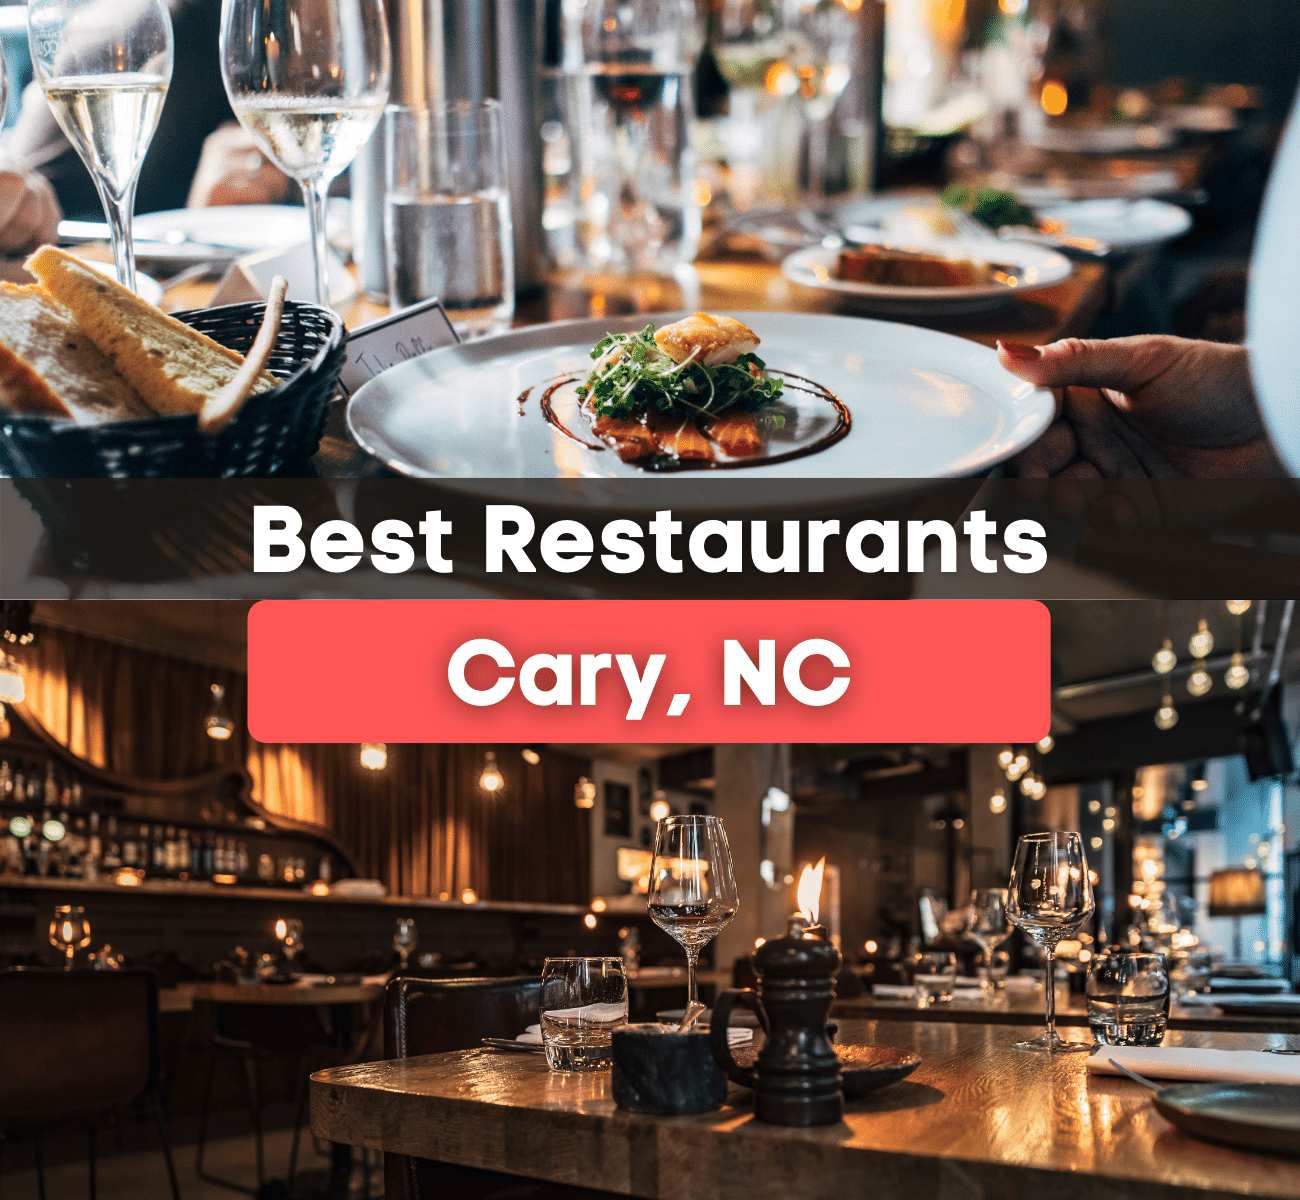 Best Restaurants in Cary, NC graphic